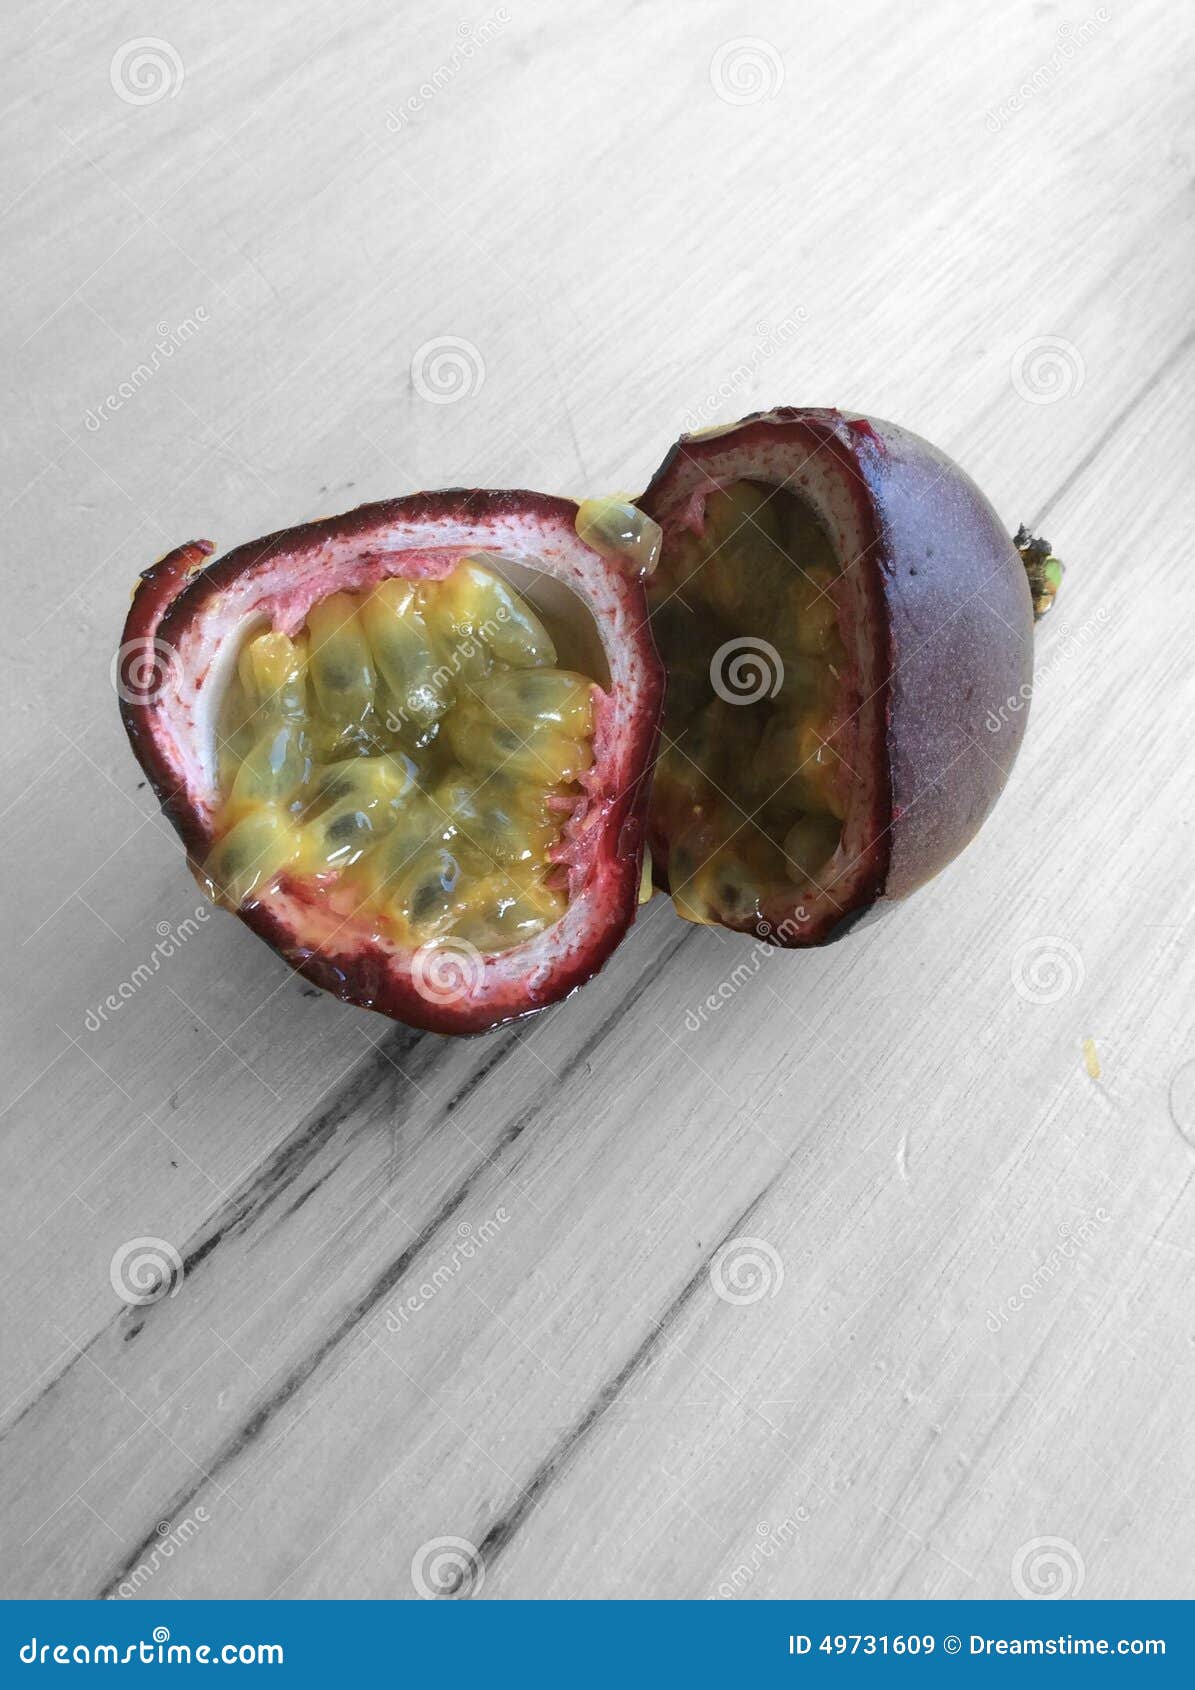 Picturess Passion Fruit Stock Image Image Of Picture